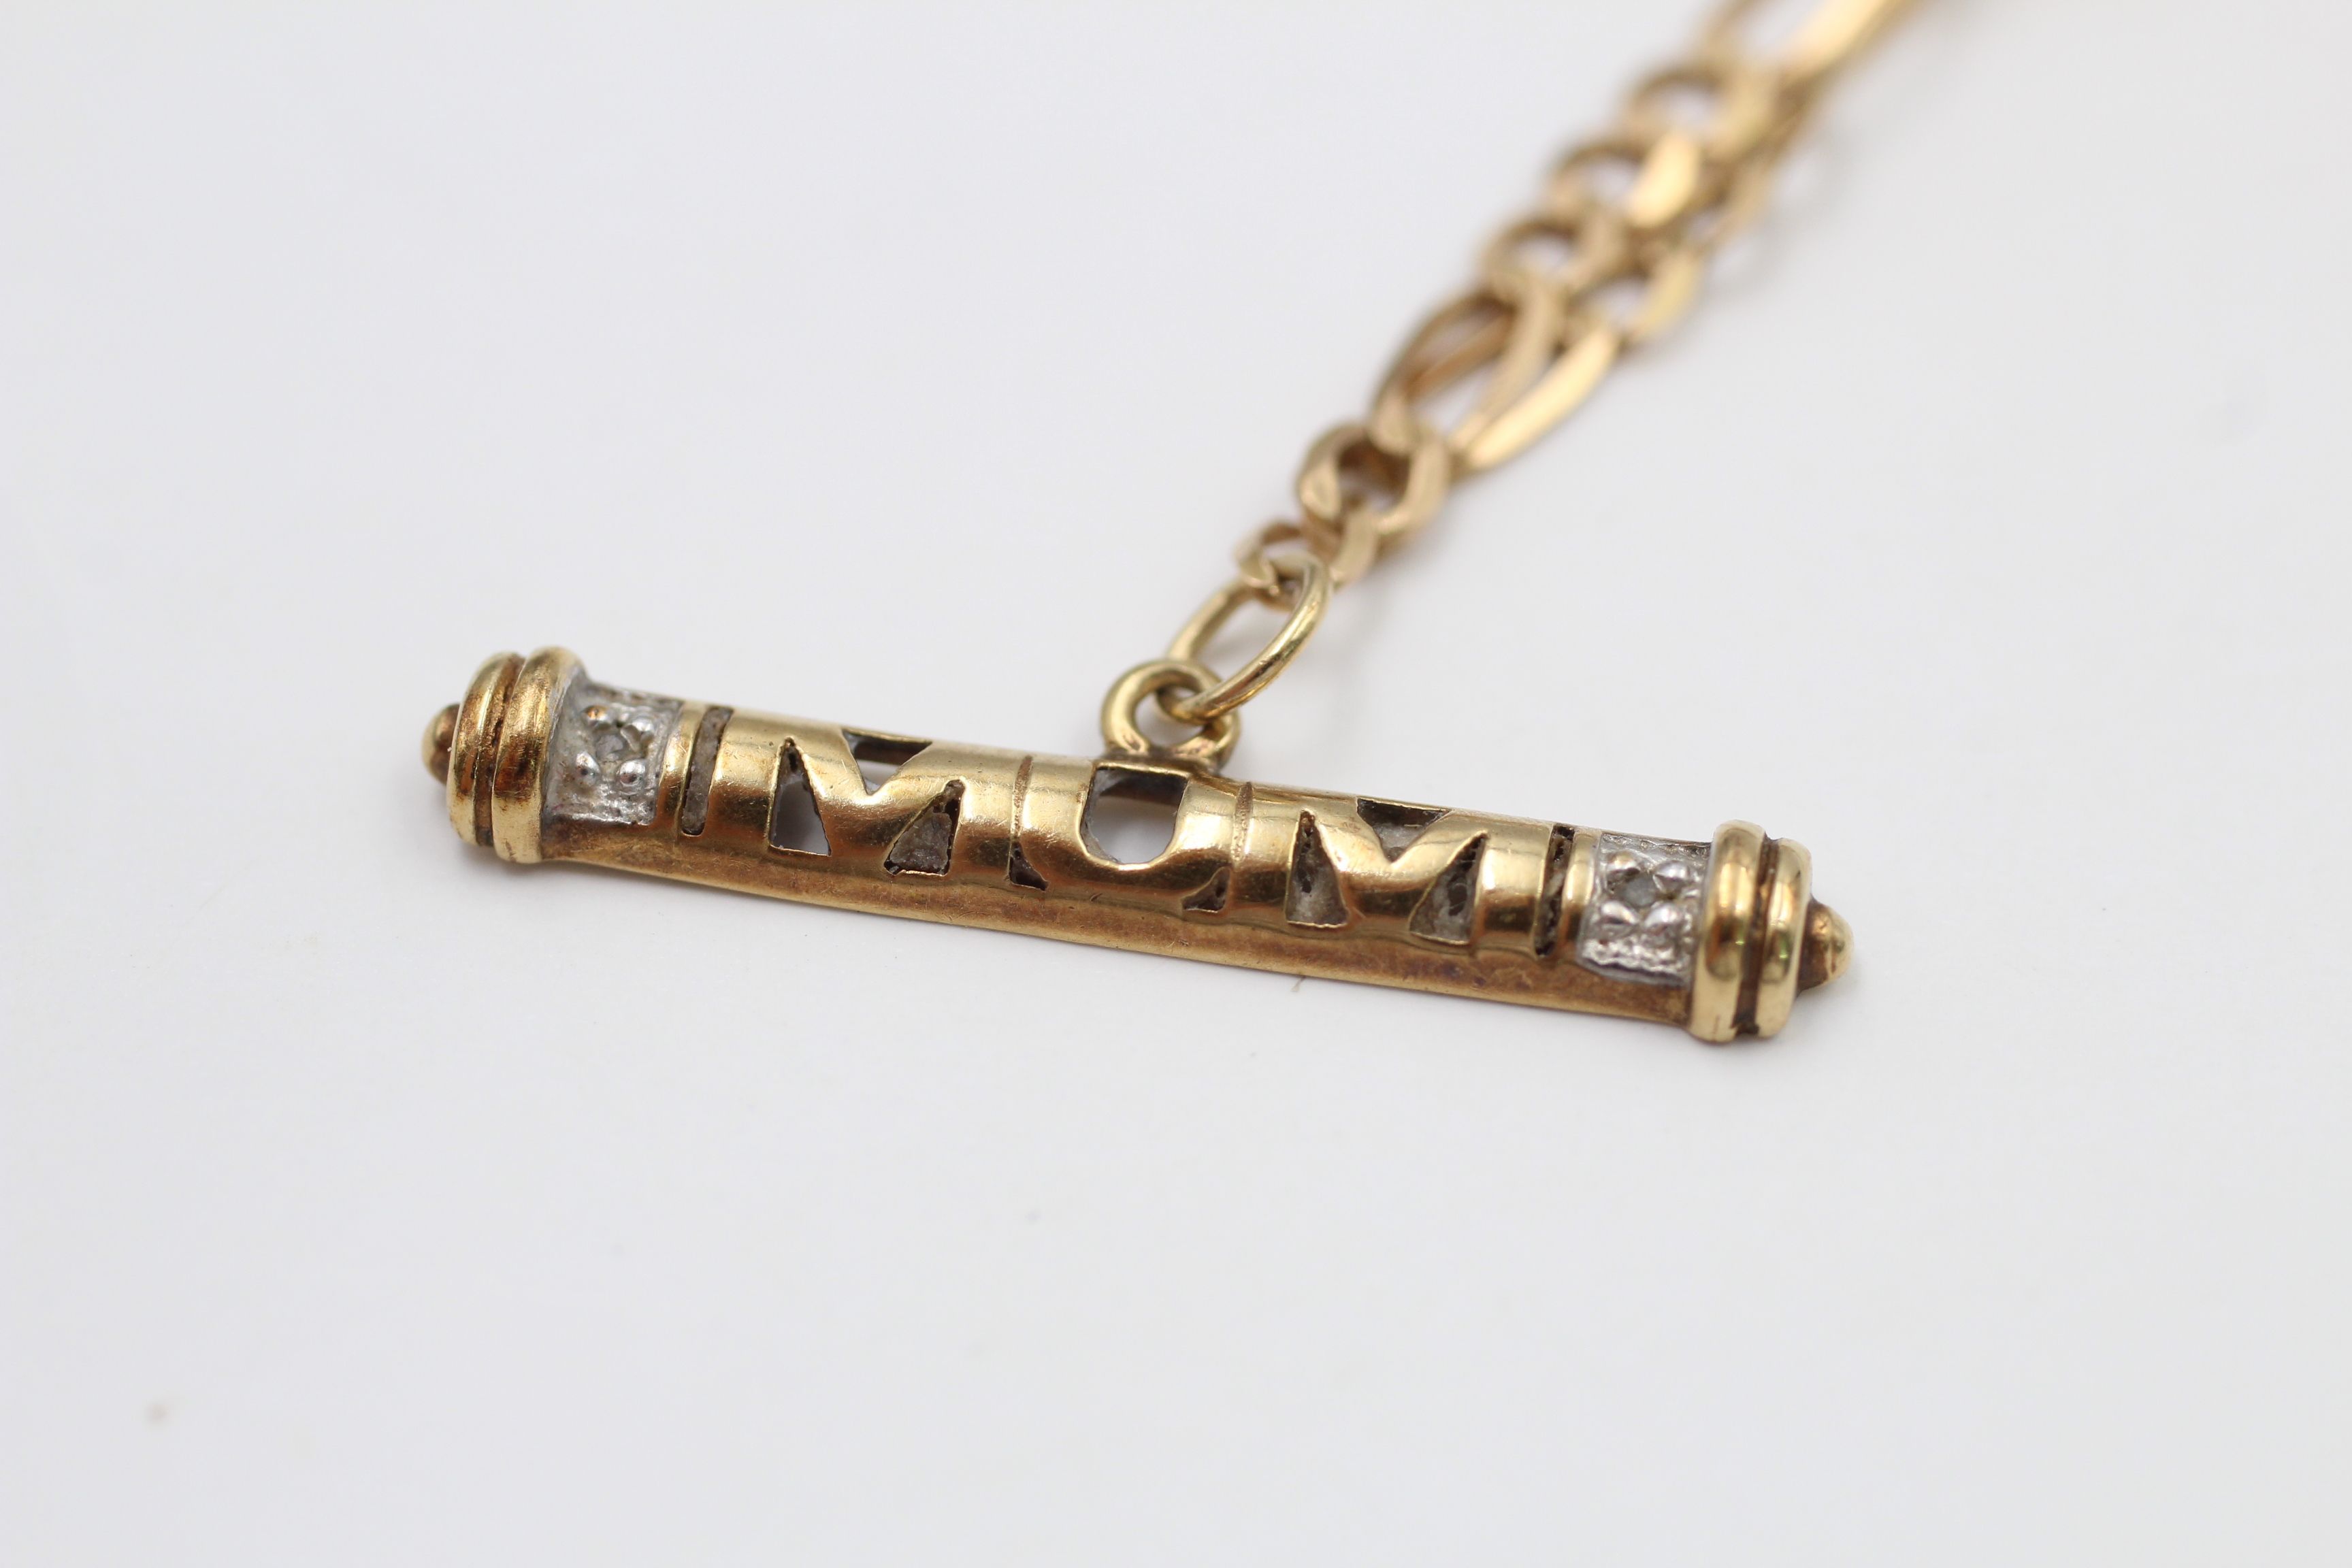 9ct gold "mum" t bar pendant necklace (4.7g) - Image 2 of 4